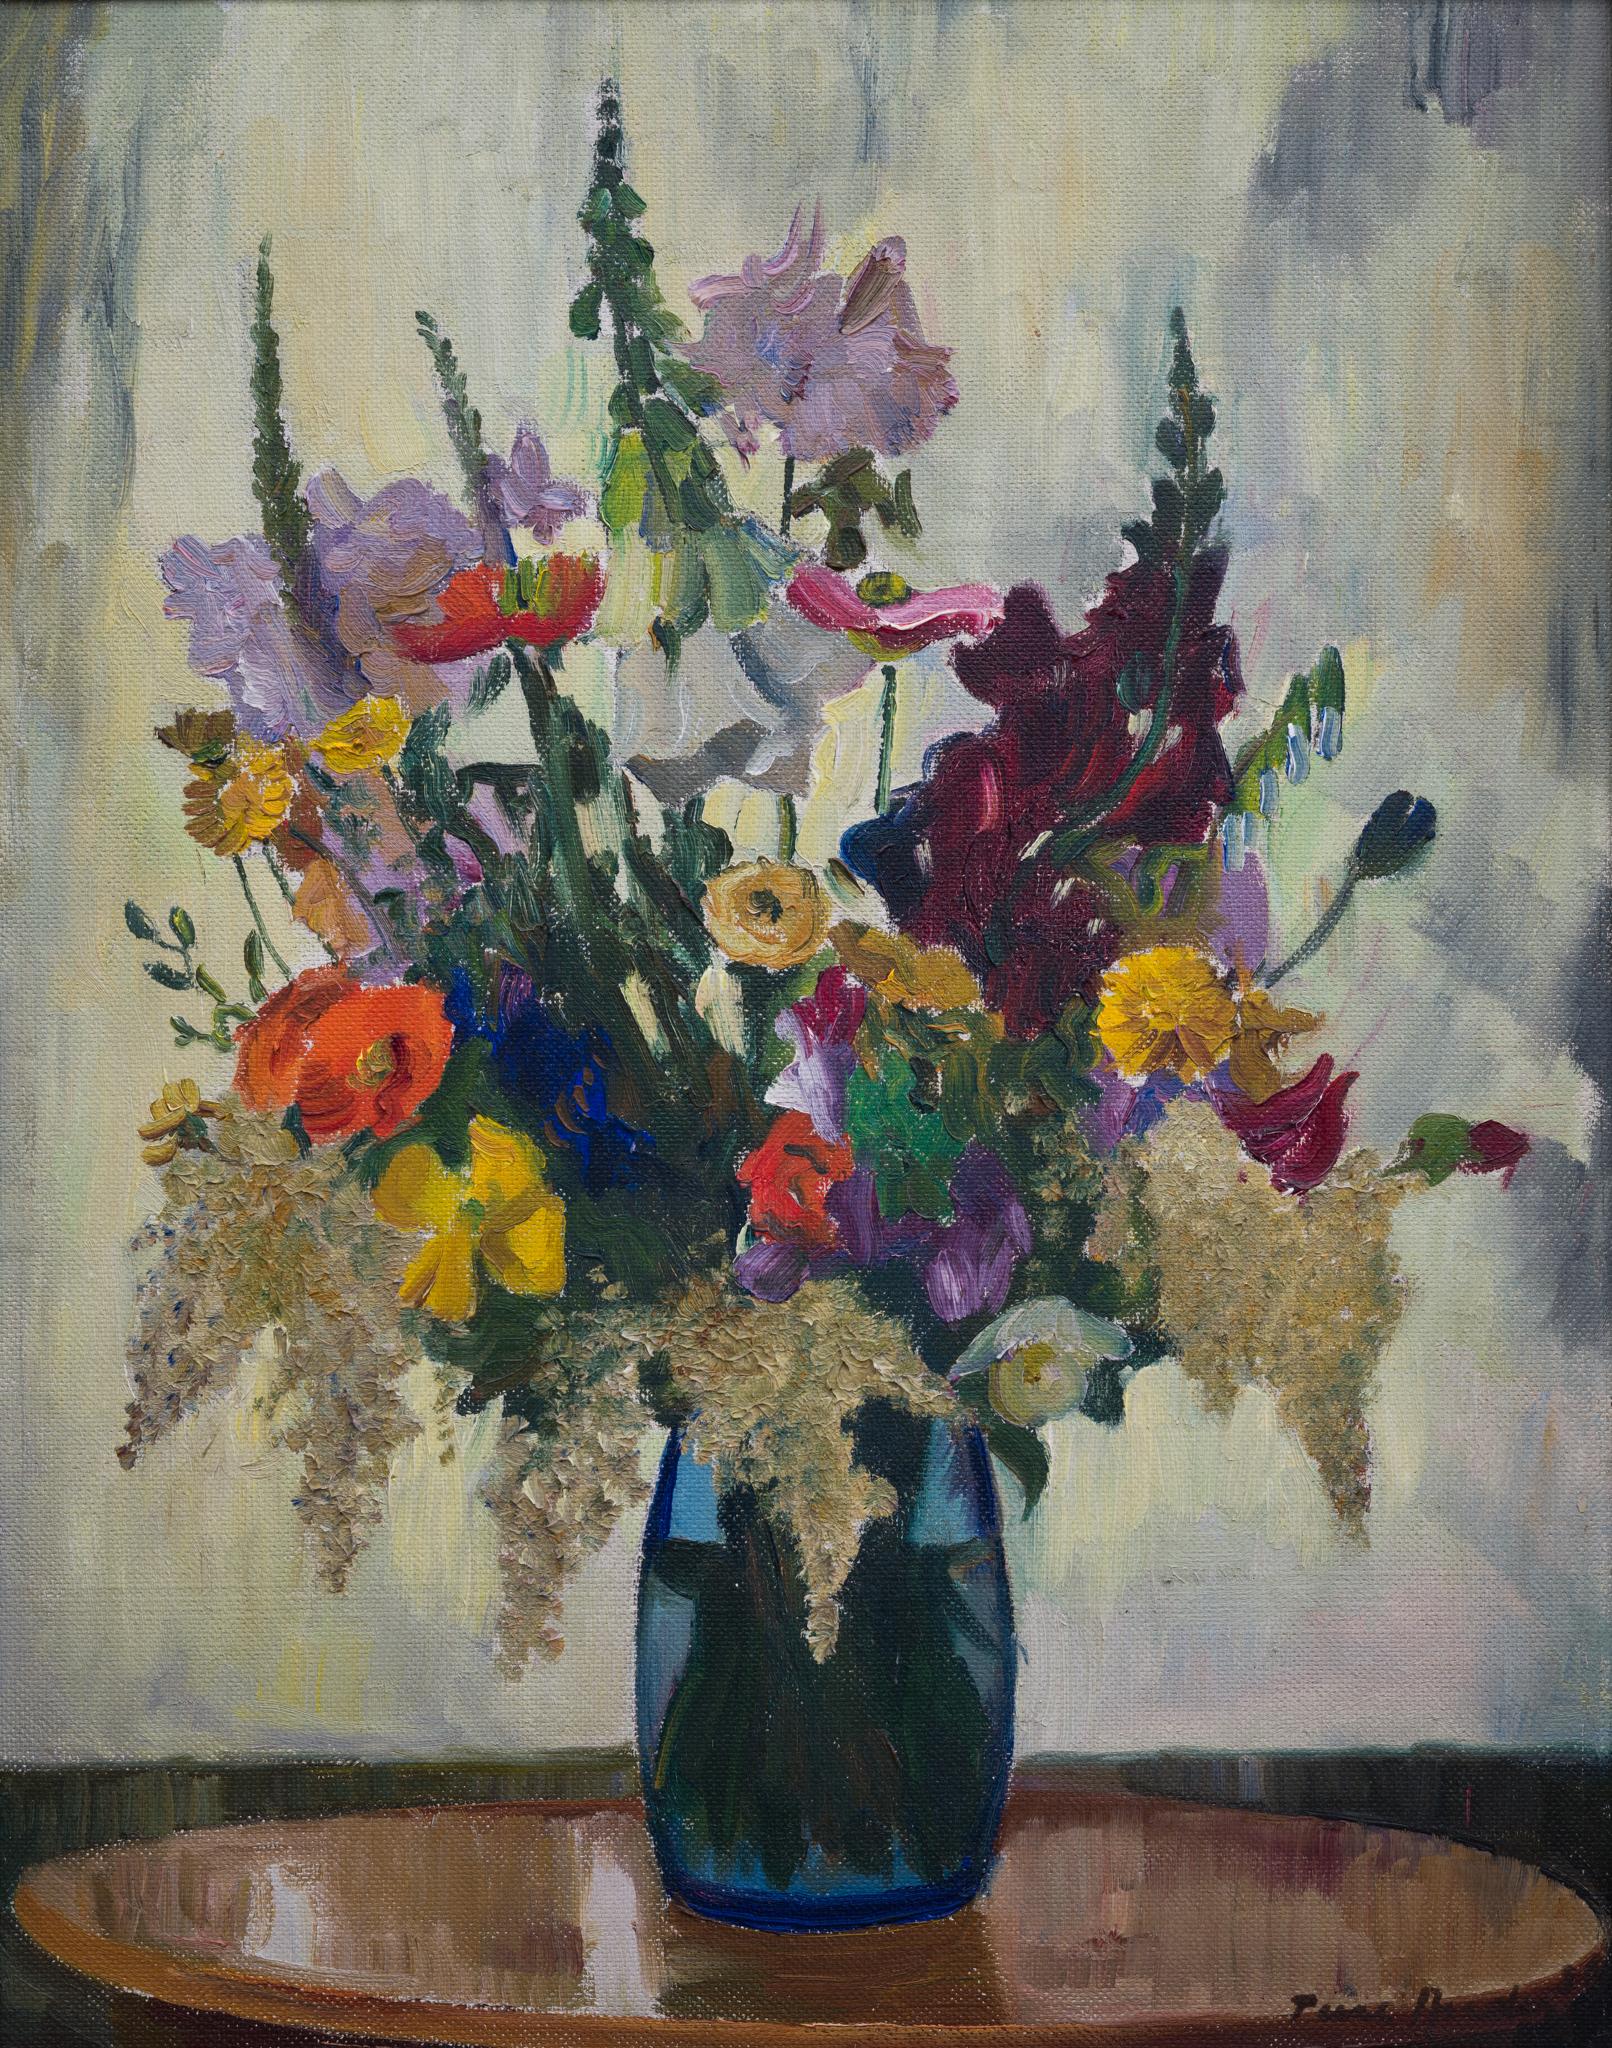 A Bouquet of Digitalis, Poppy, Iris, Snapdragons, Cornflower, Buttercup, 1936 - Painting by Ture Ander